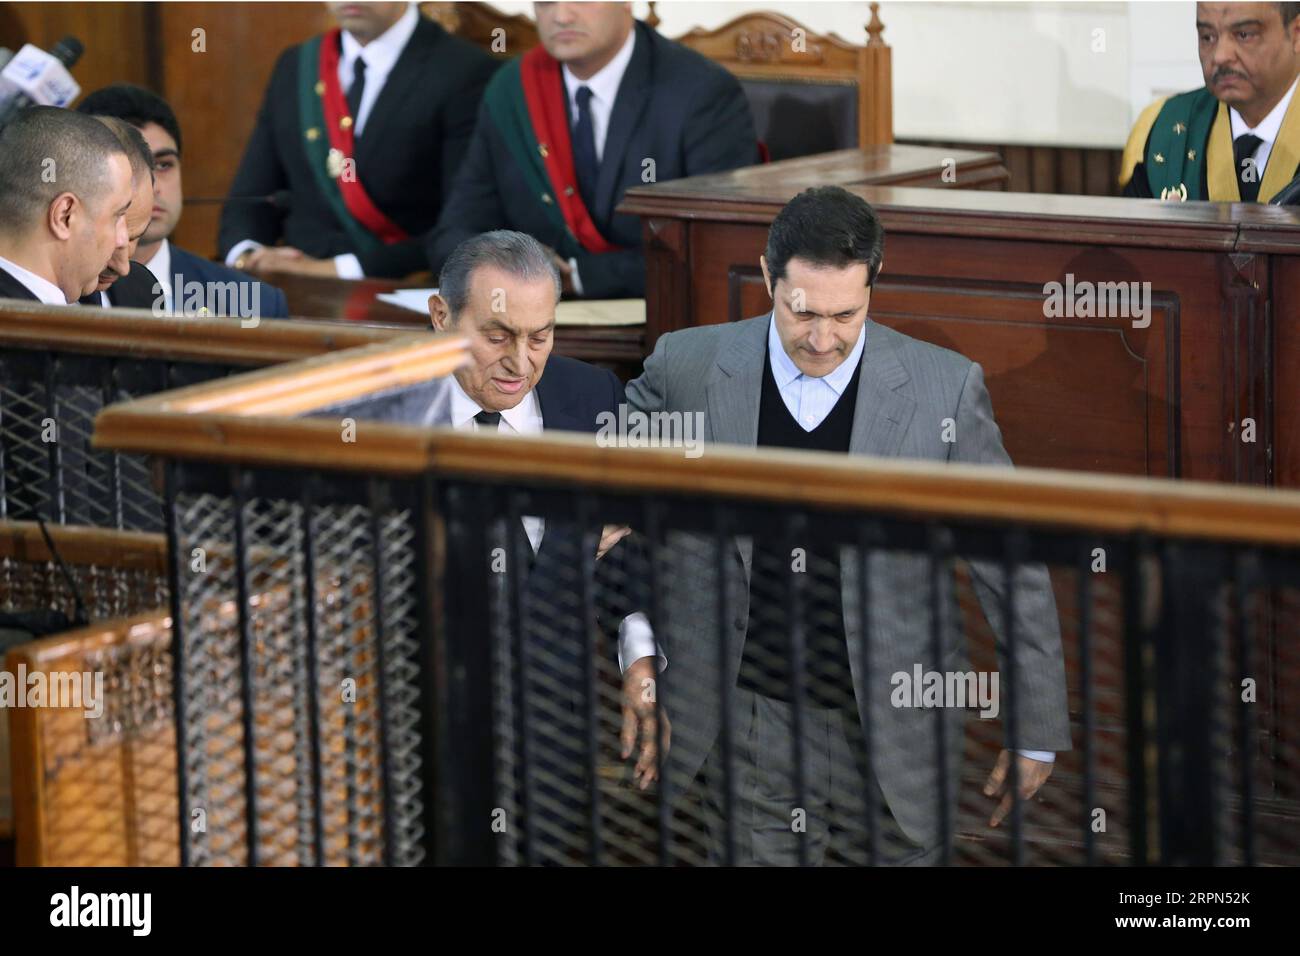 200222 -- CAIRO, Feb. 22, 2020 -- File photo taken on Dec. 26, 2018 shows Alaa Mubarak 2nd R and his father, ousted Egyptian president Mohamed Hosni Mubarak C, in a court in Cairo, Egypt. An Egyptian court acquitted on Saturday Alaa and Gamal Mubarak, the sons of ousted Egyptian president Mohamed Hosni Mubarak, in a corruption case, state-run Ahram Online news website reported.  EGYPT-CAIRO-SONS OF EX-PRESIDENT MUBARAK-CORRUPTION CHARGES AhmedxGomaa PUBLICATIONxNOTxINxCHN Stock Photo